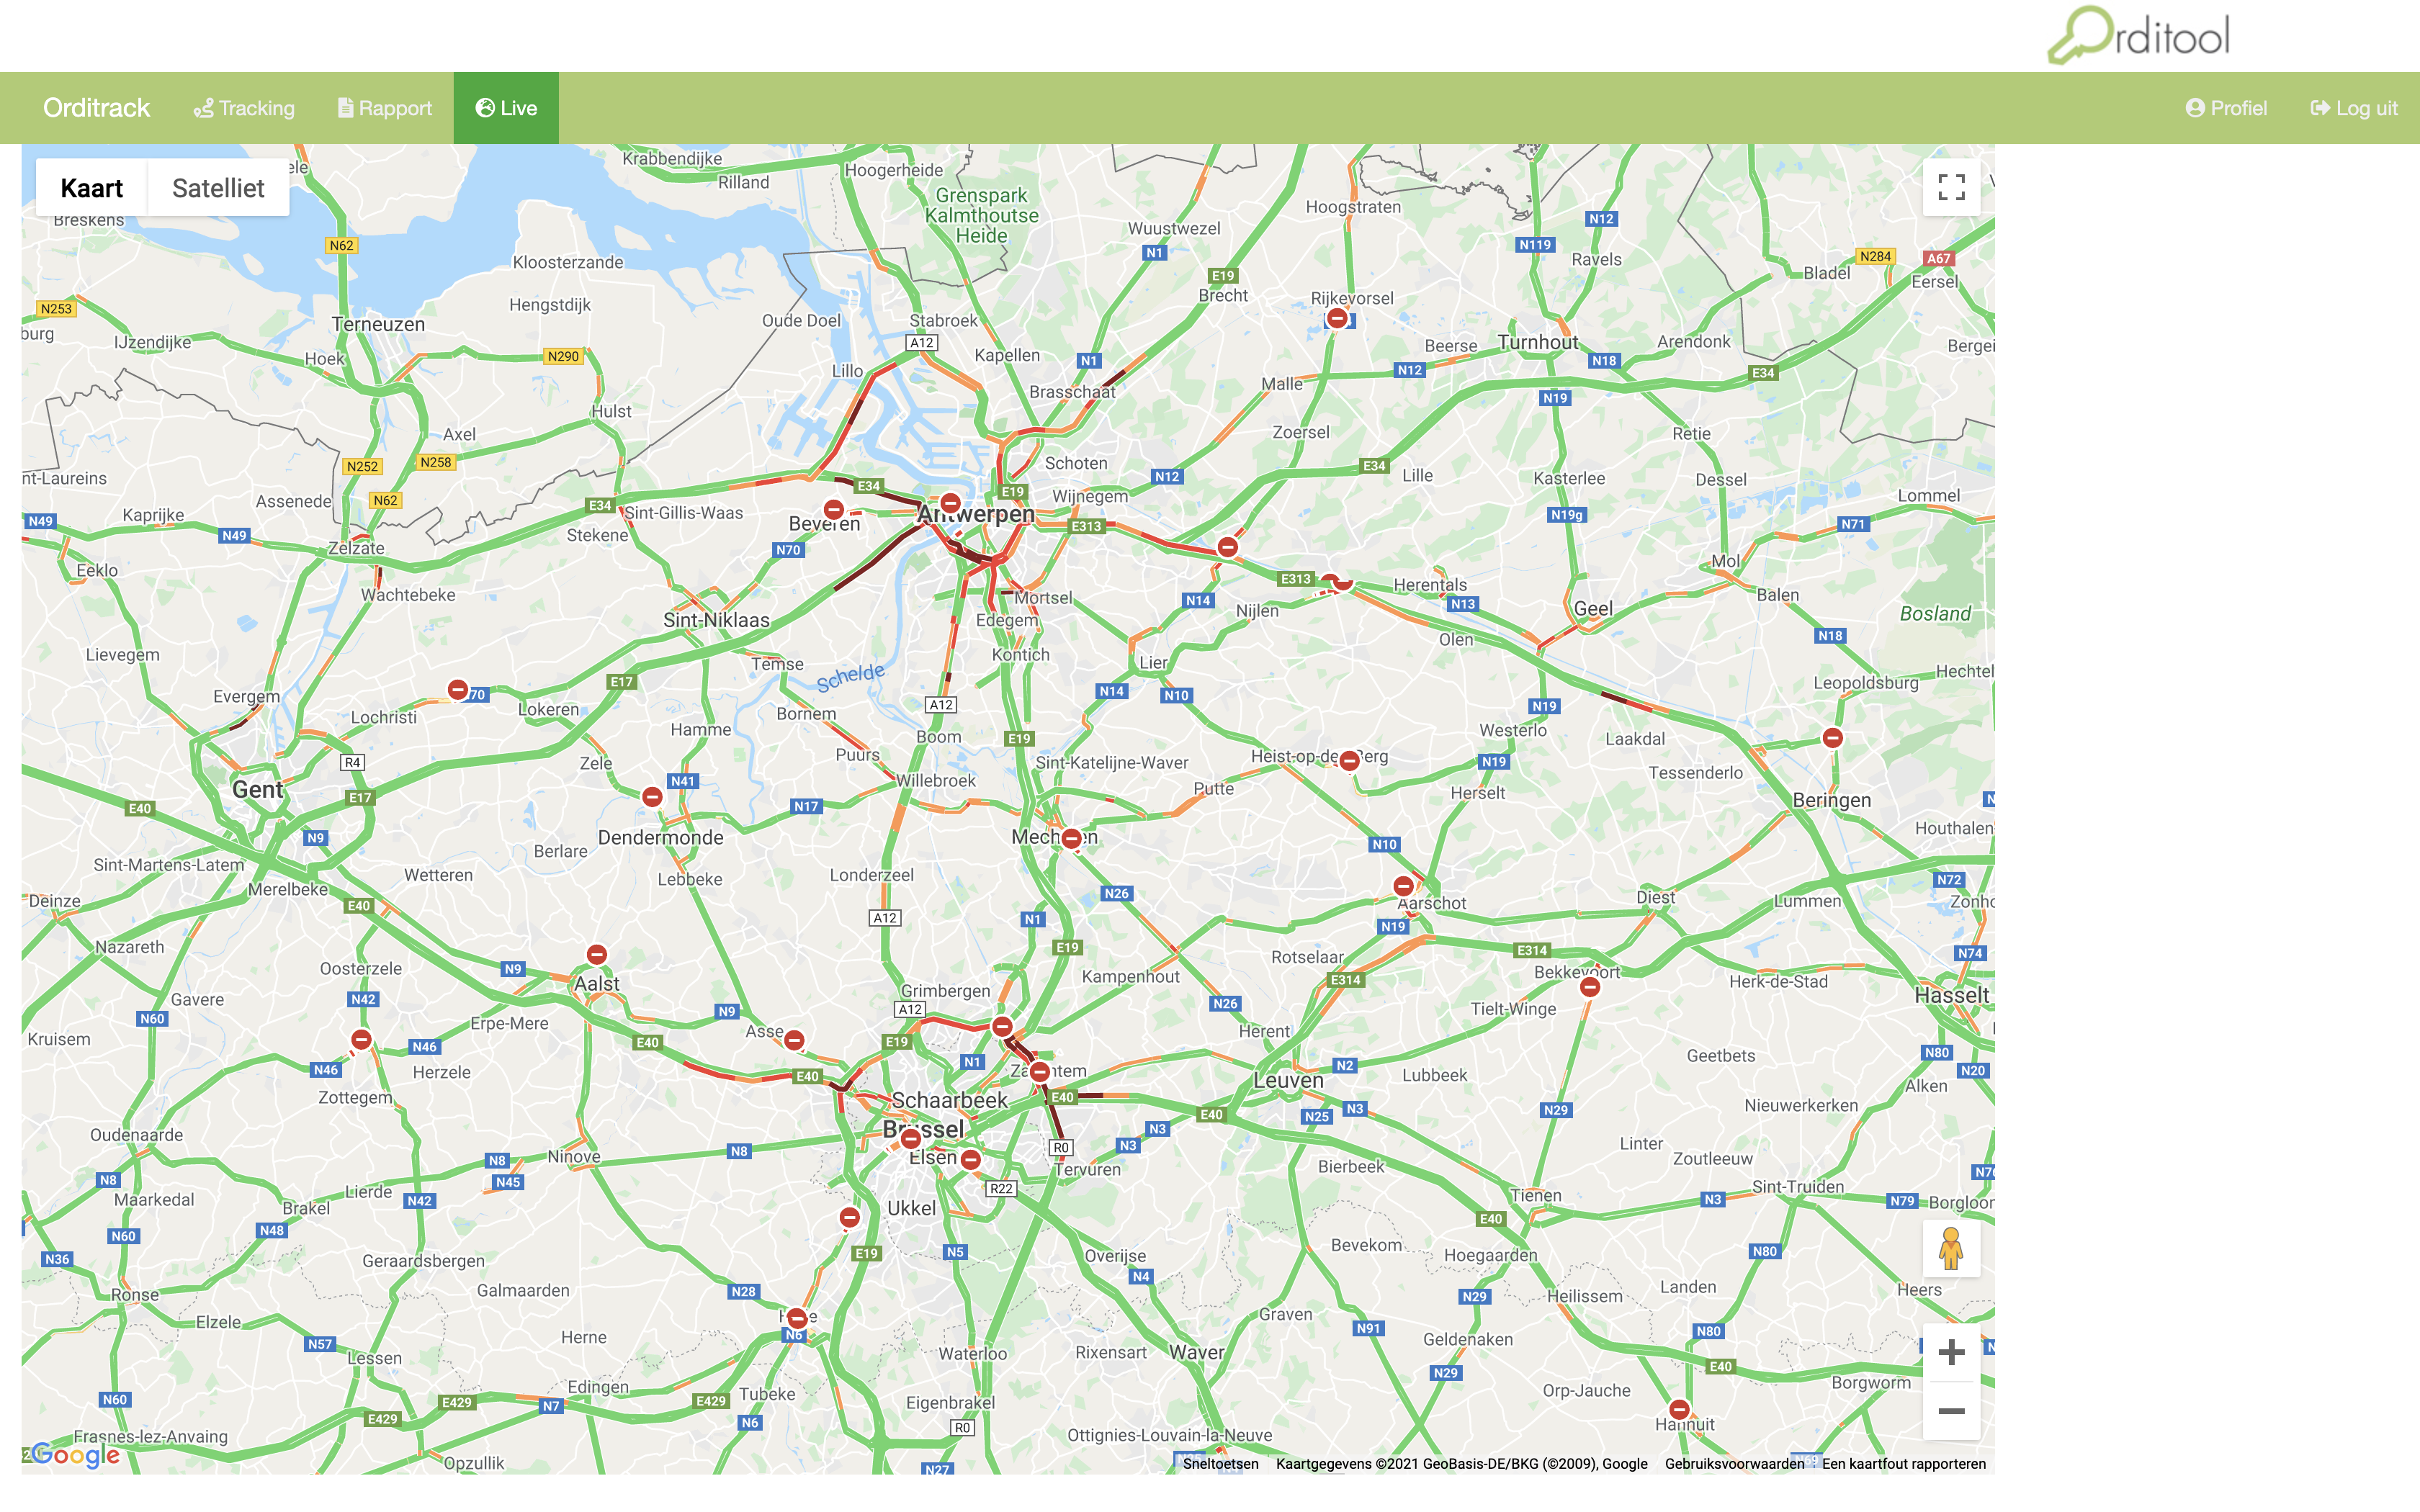 Real-time traffic situation